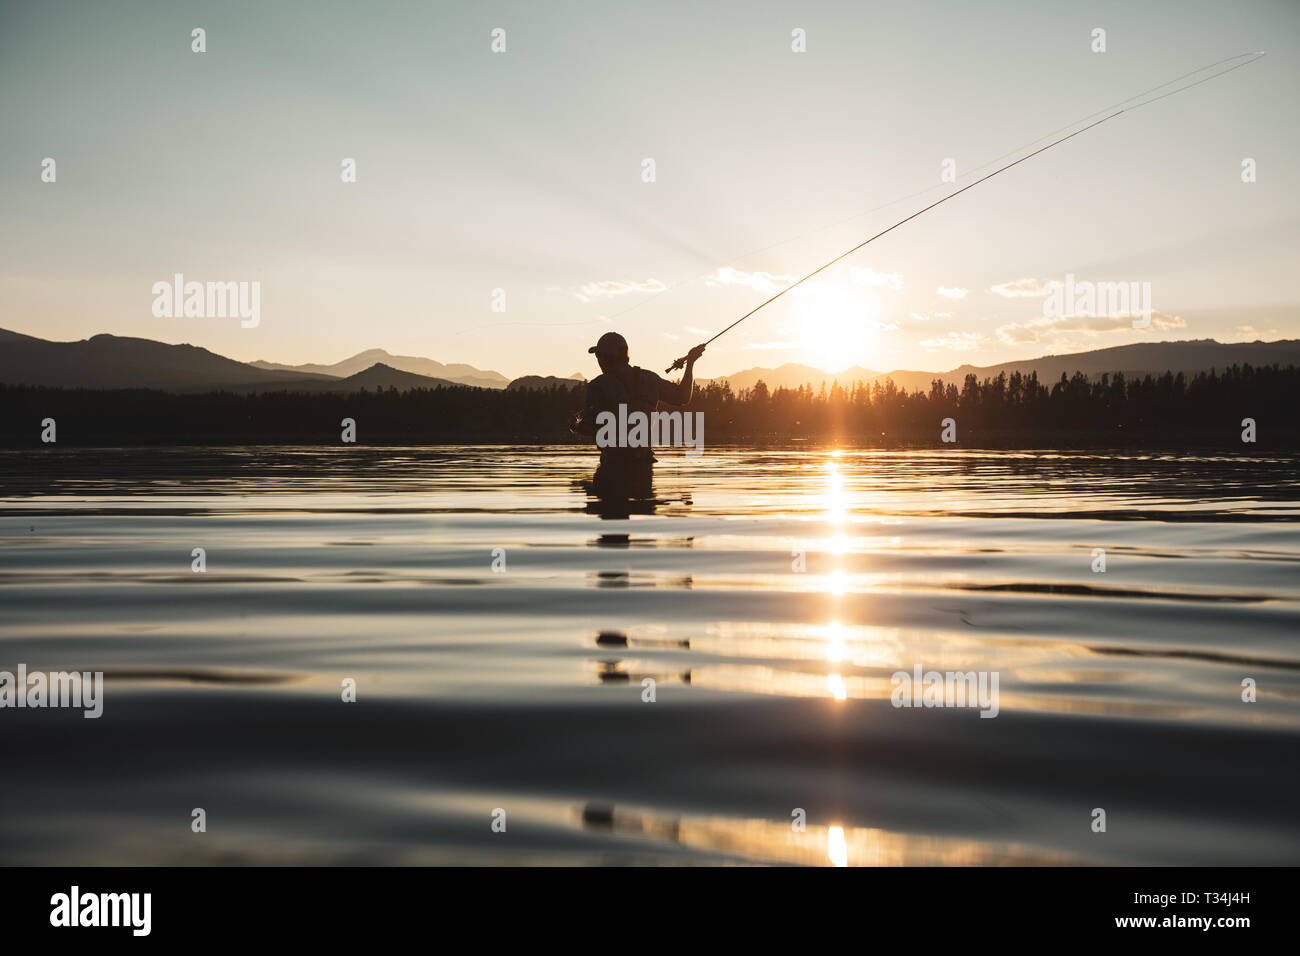 Silhouette of a man standing in a river fly fishing, United States Stock Photo